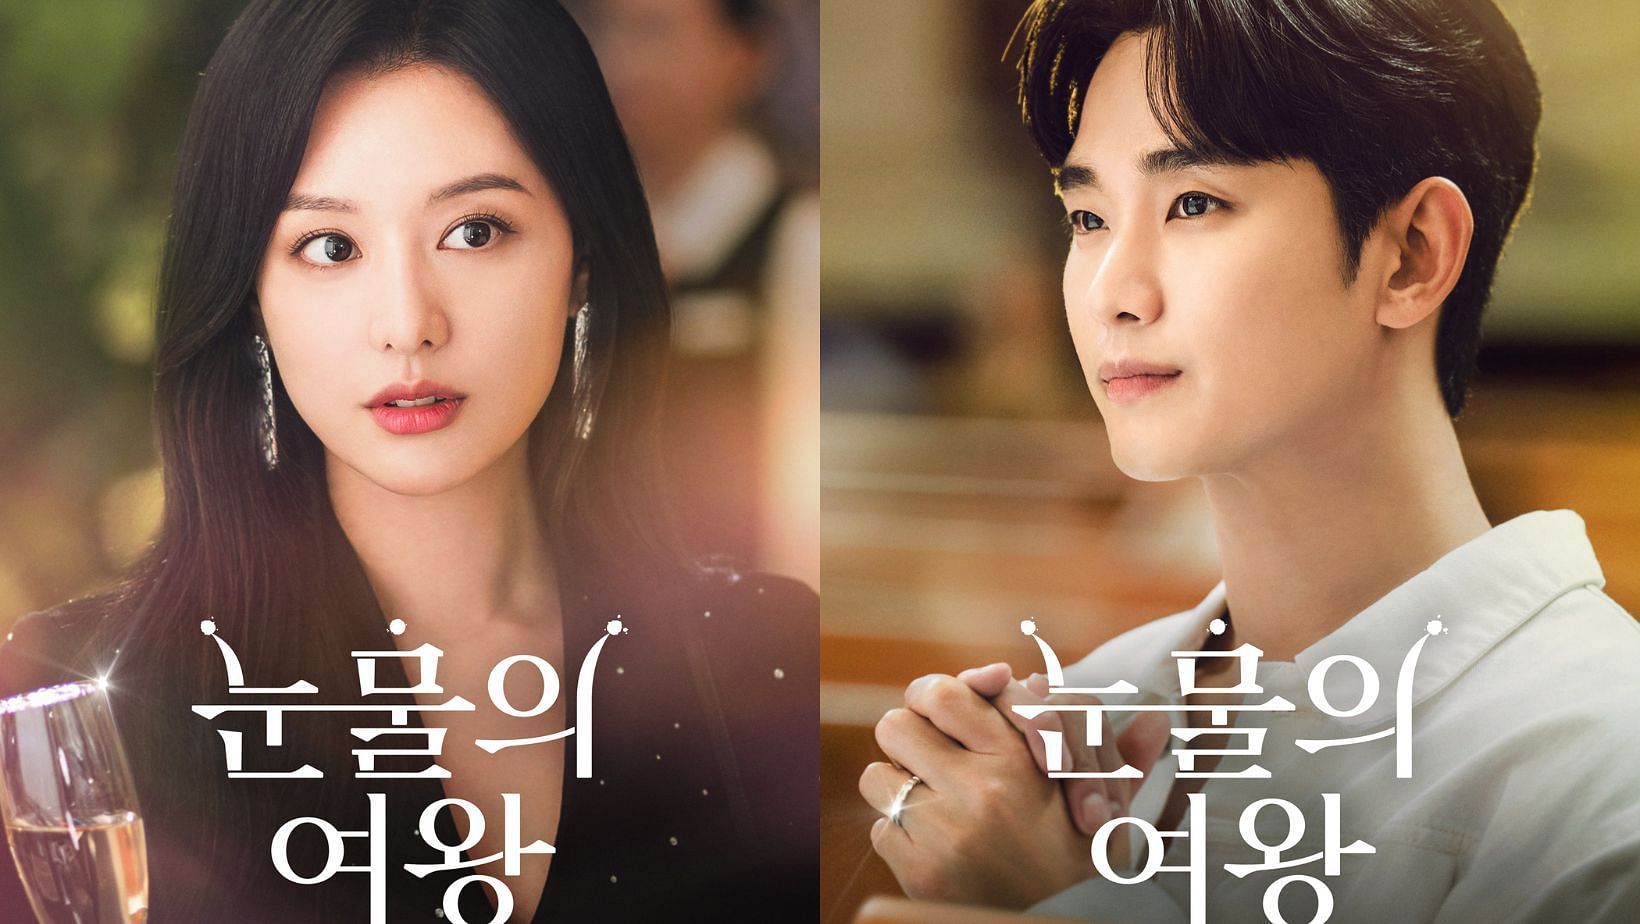 Kim Soo-hyun and Kim Ji-won became the talk of the town for their ongoing Netflix drama 